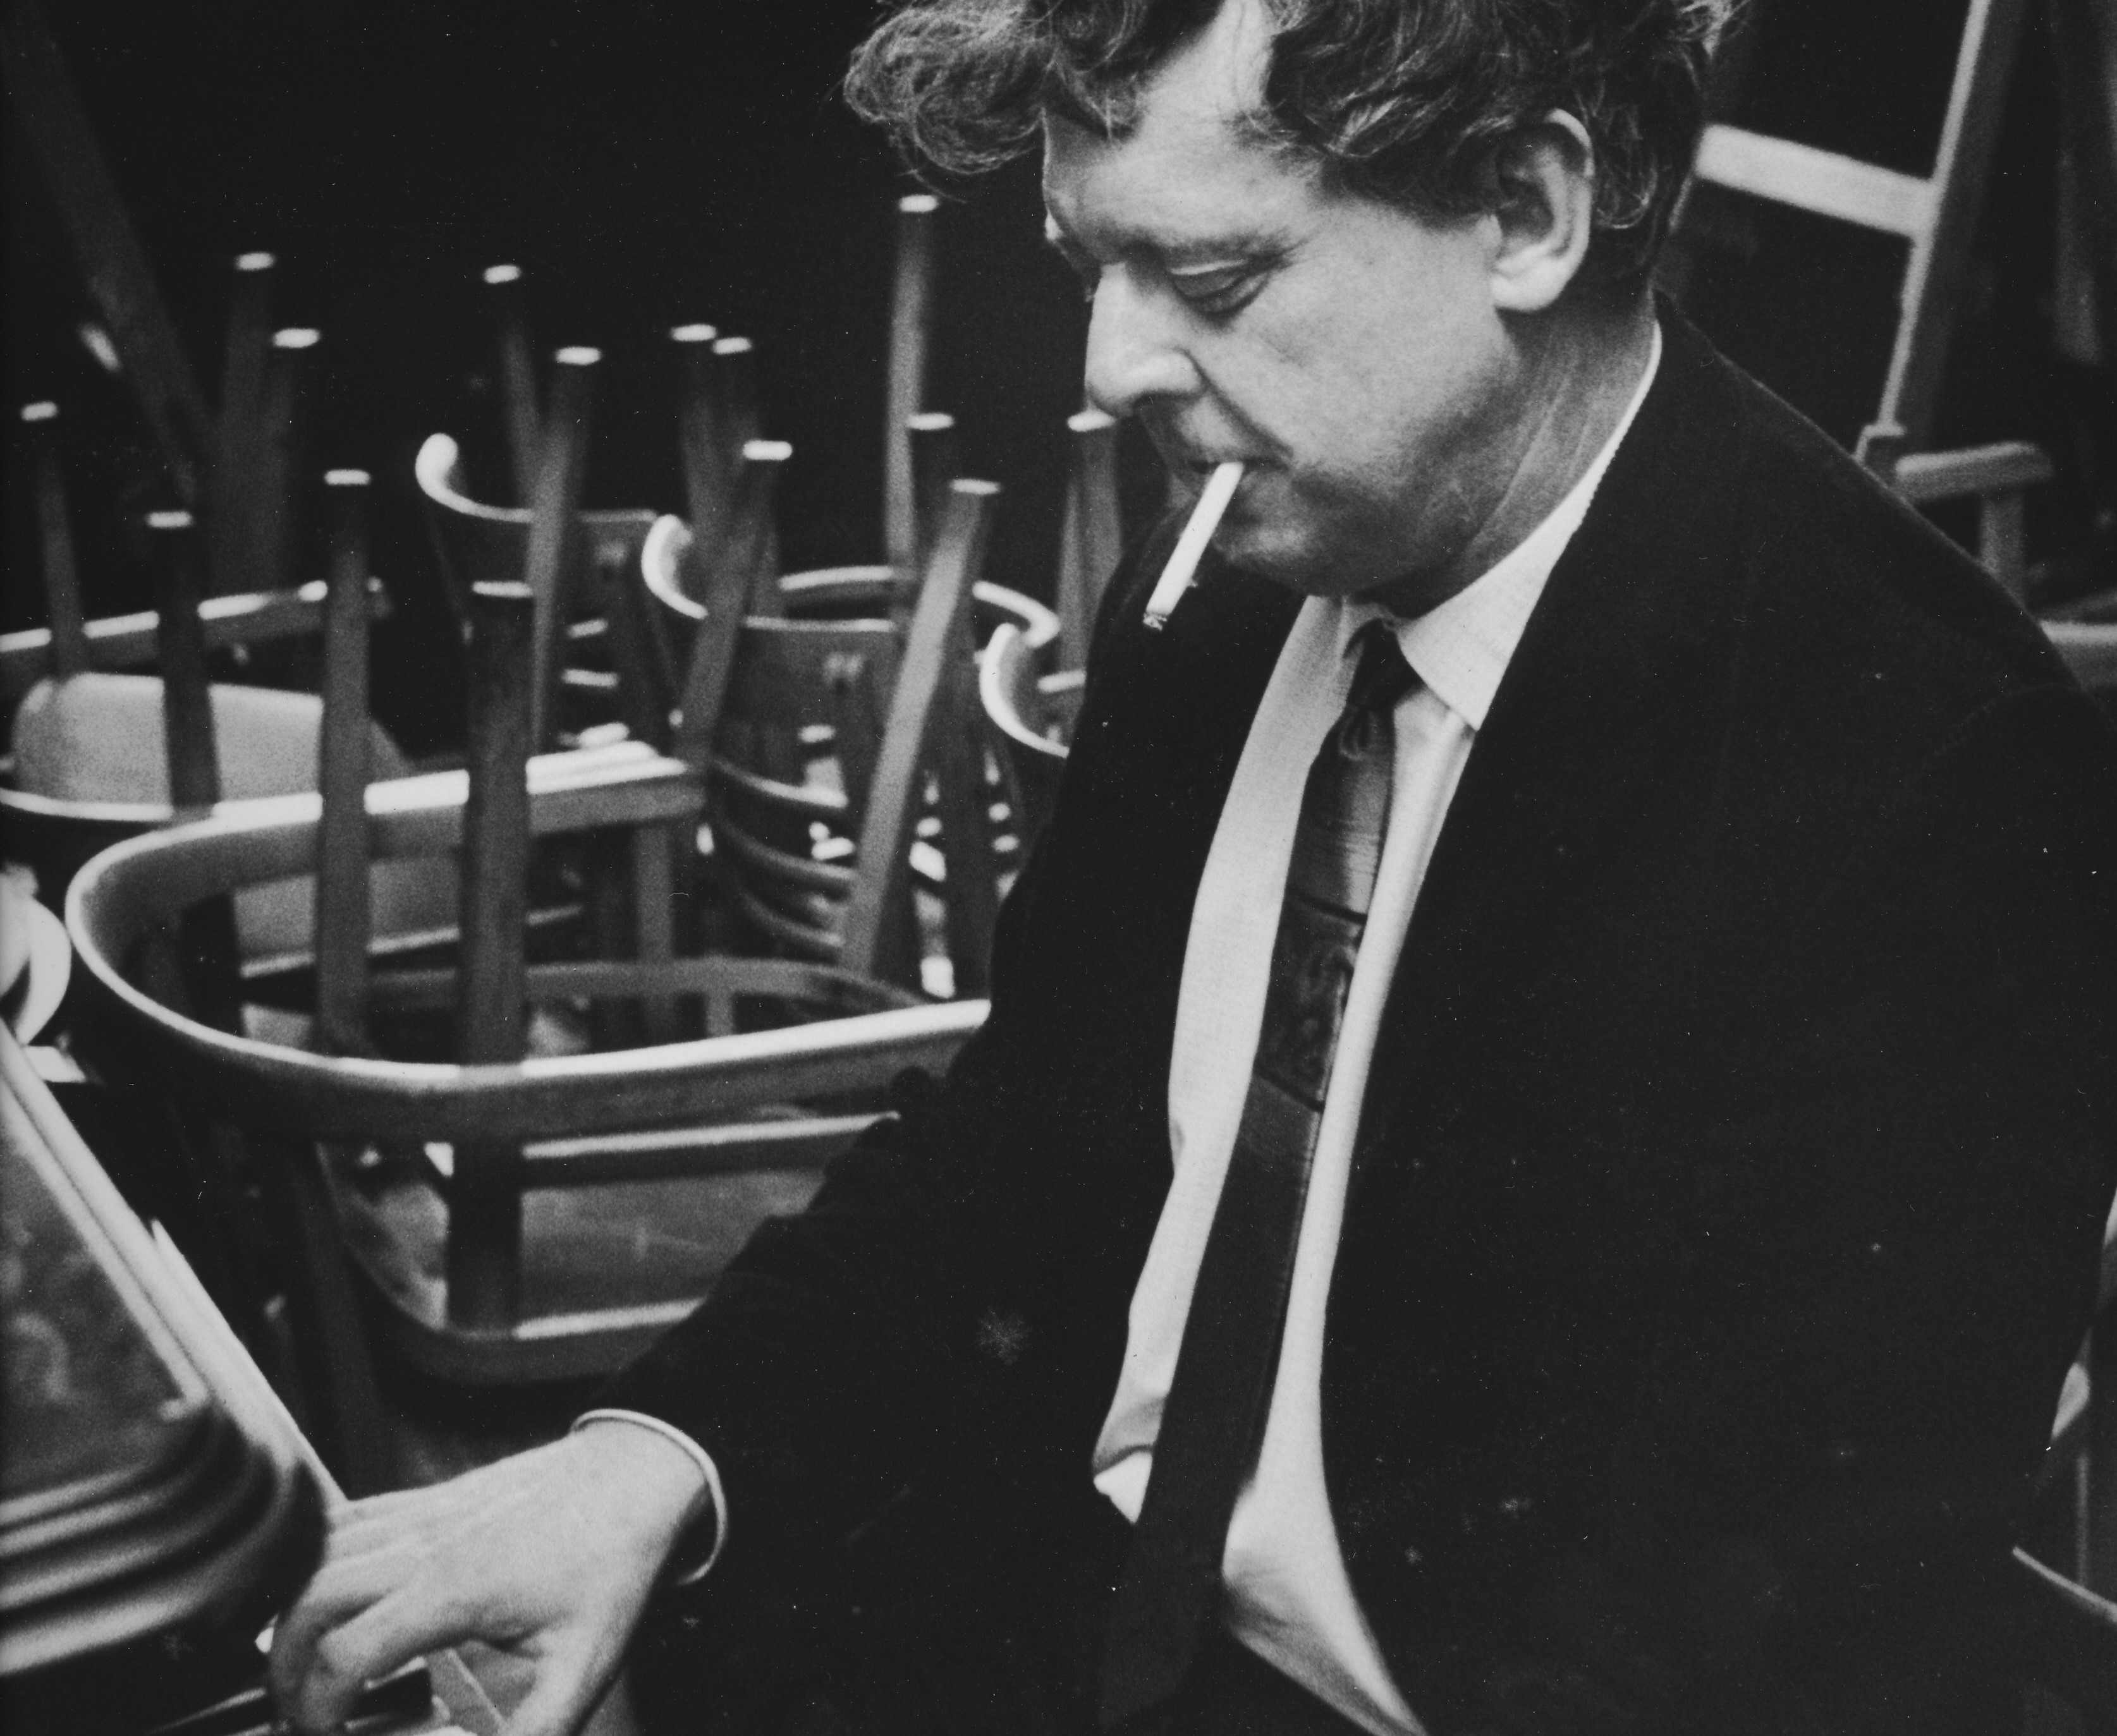 Anthony Burgess at the piano (credit: Anthony Burgess Foundation)